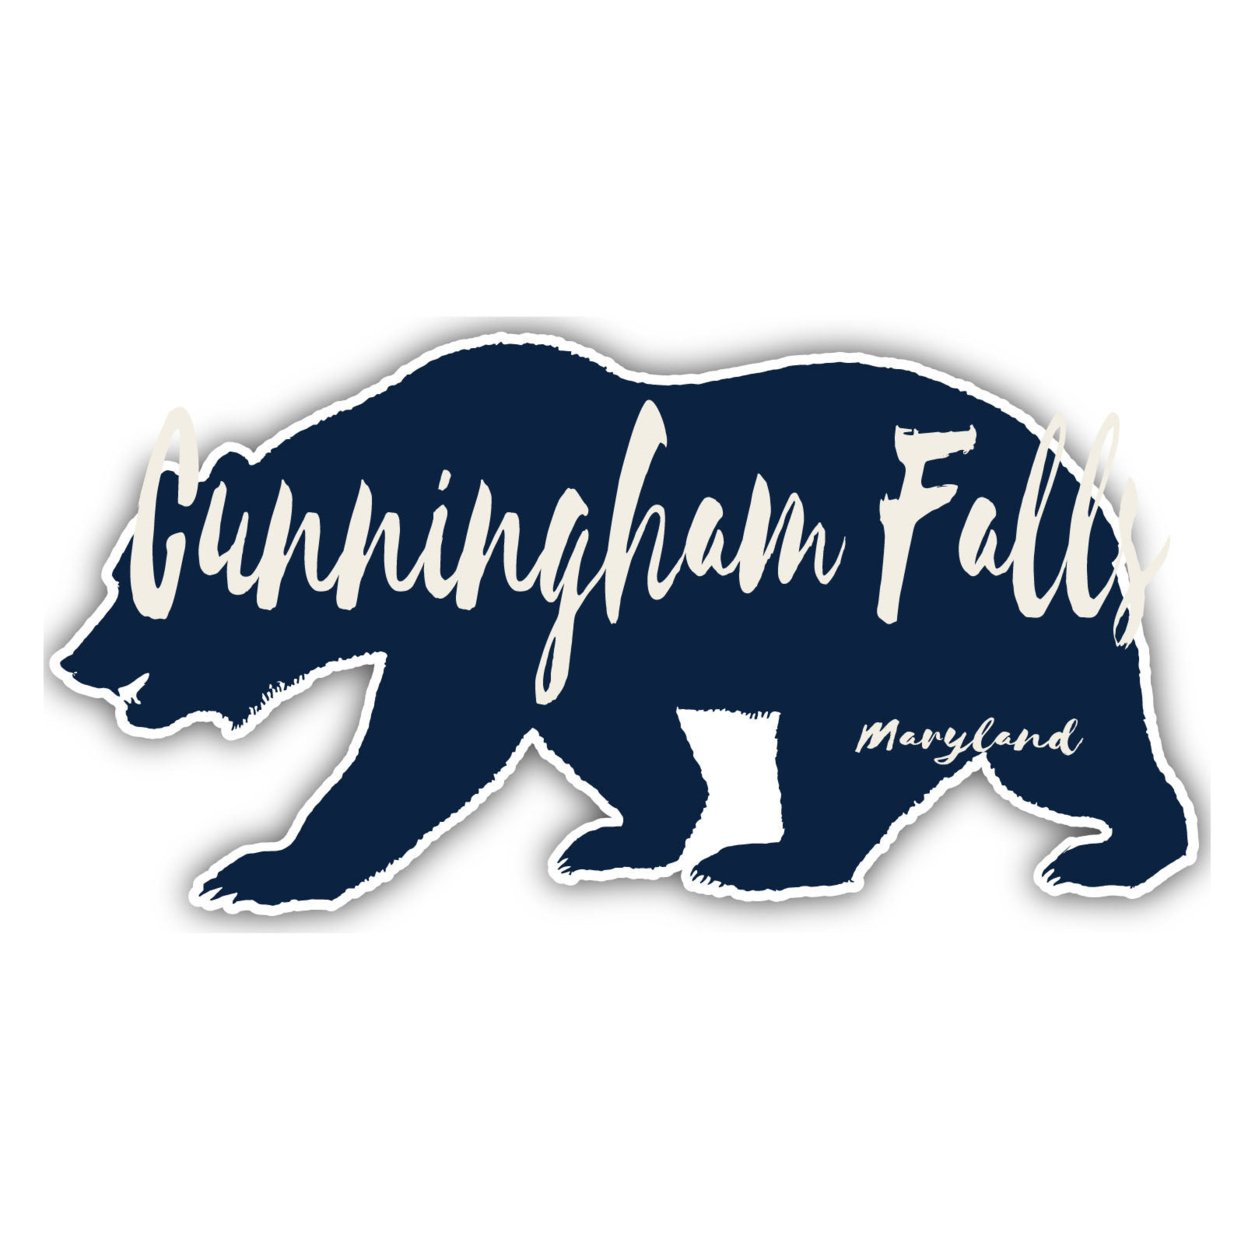 Cunningham Falls Maryland Souvenir Decorative Stickers (Choose Theme And Size) - Single Unit, 4-Inch, Bear